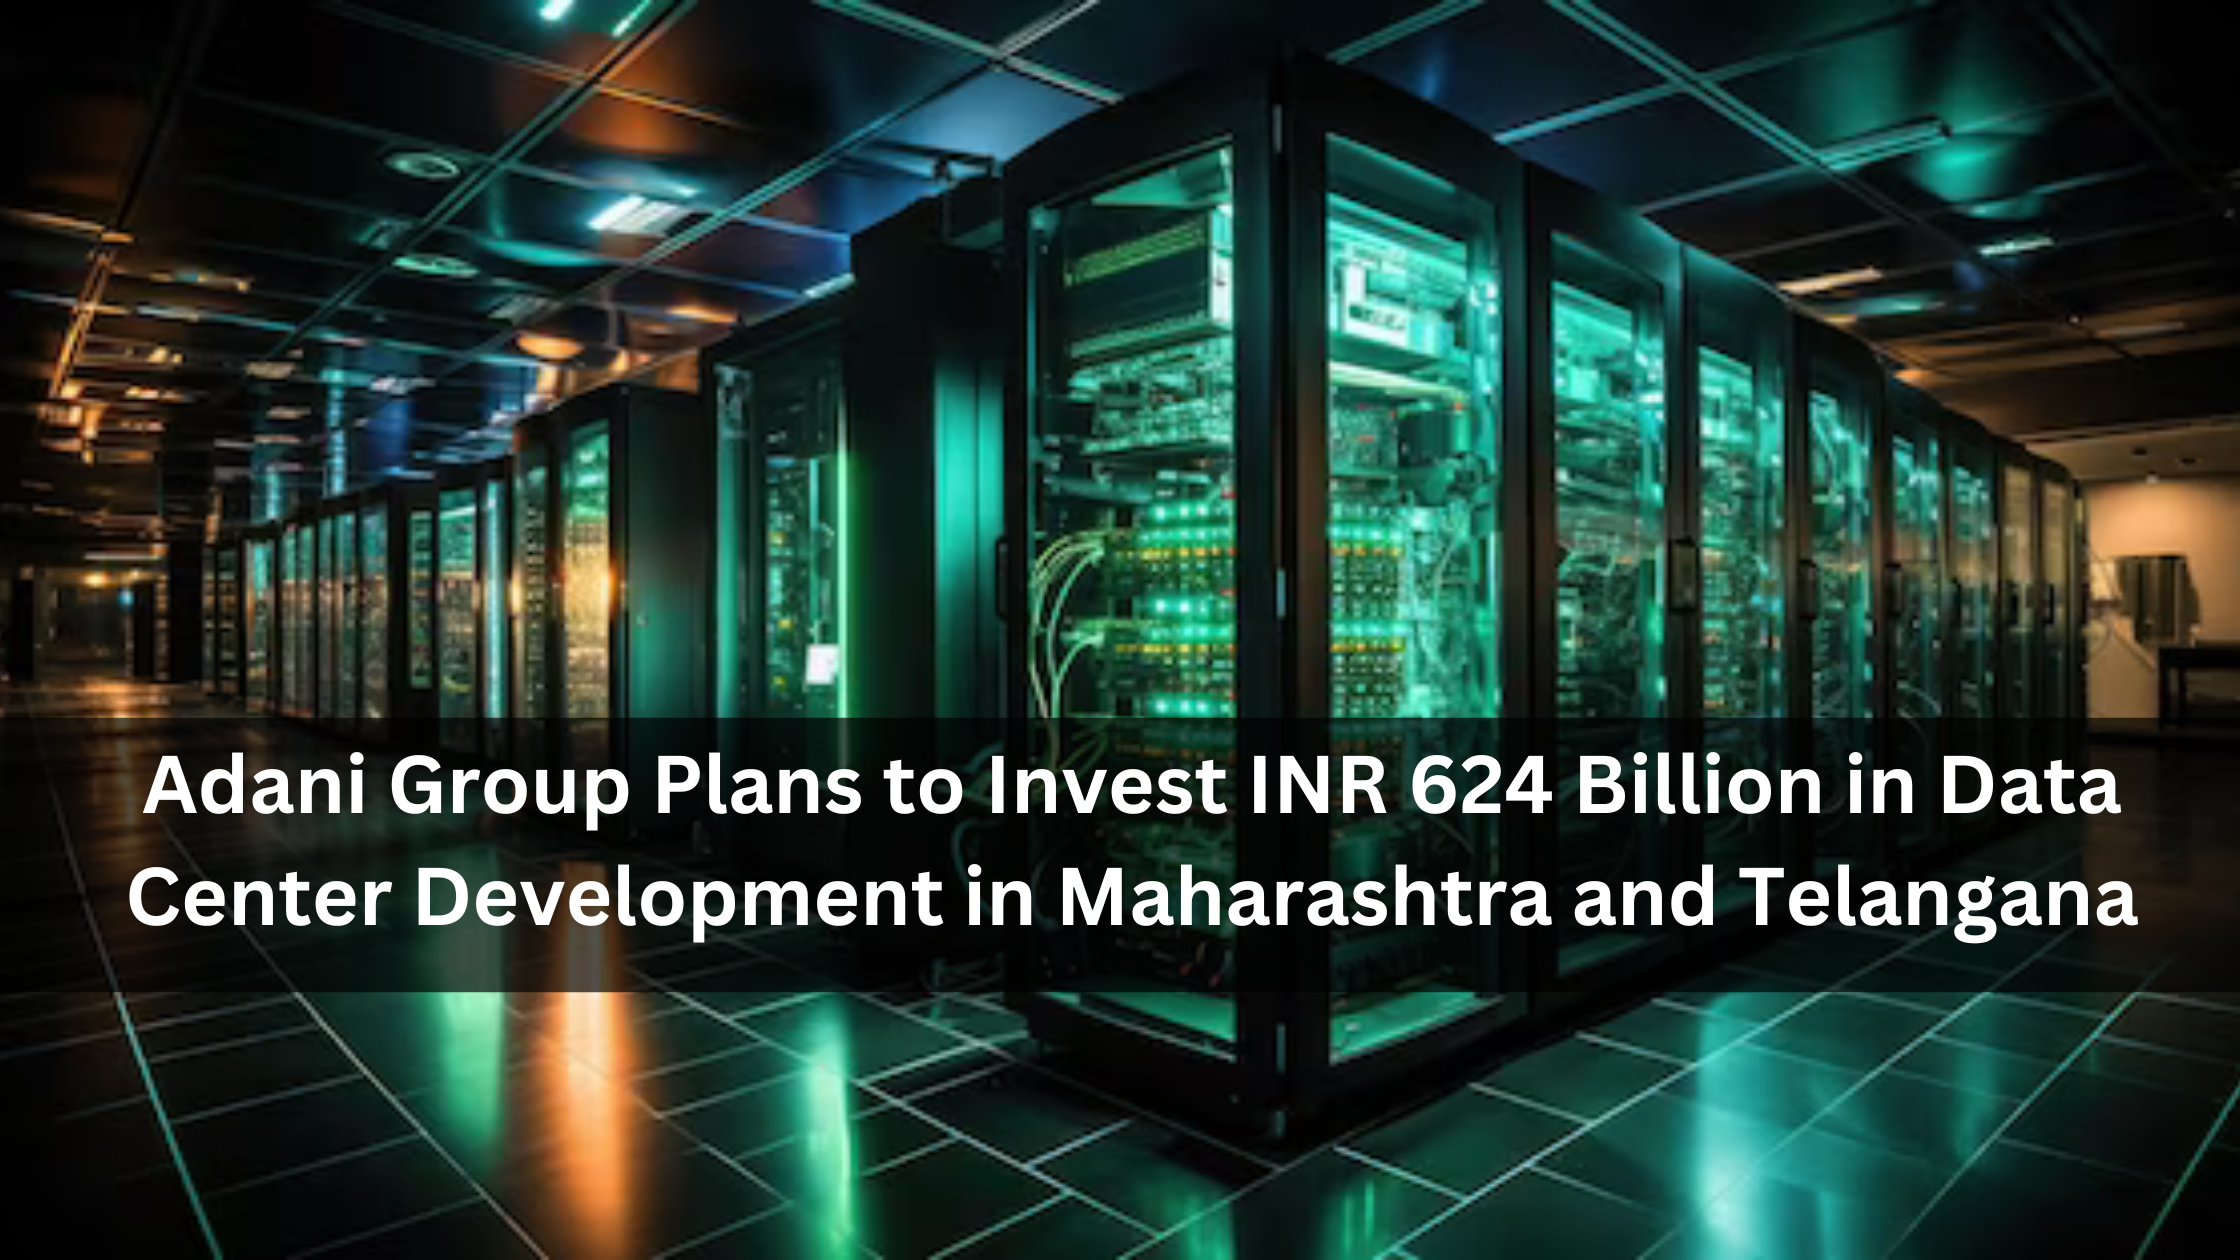 Adani Group Plans to Invest INR 624 Billion in Data Center Development in Maharashtra and Telangana